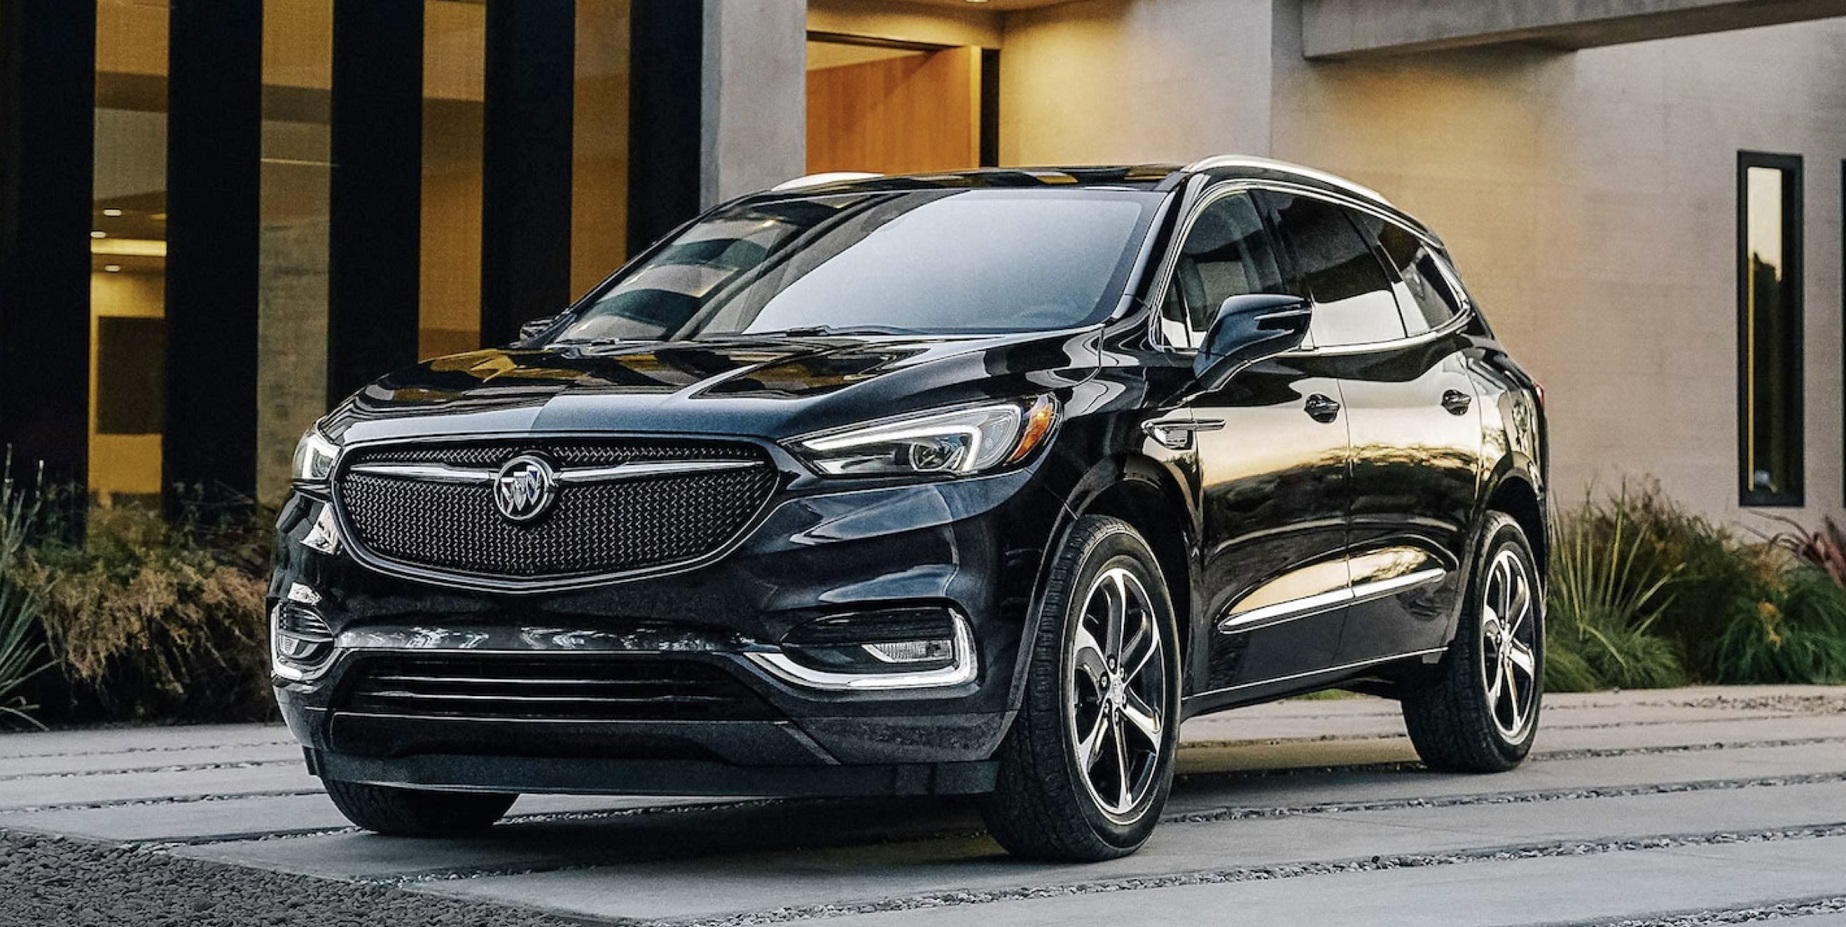 See the new 2021 Buick Enclave in Englewood NJ - Quality Buick of Englewood